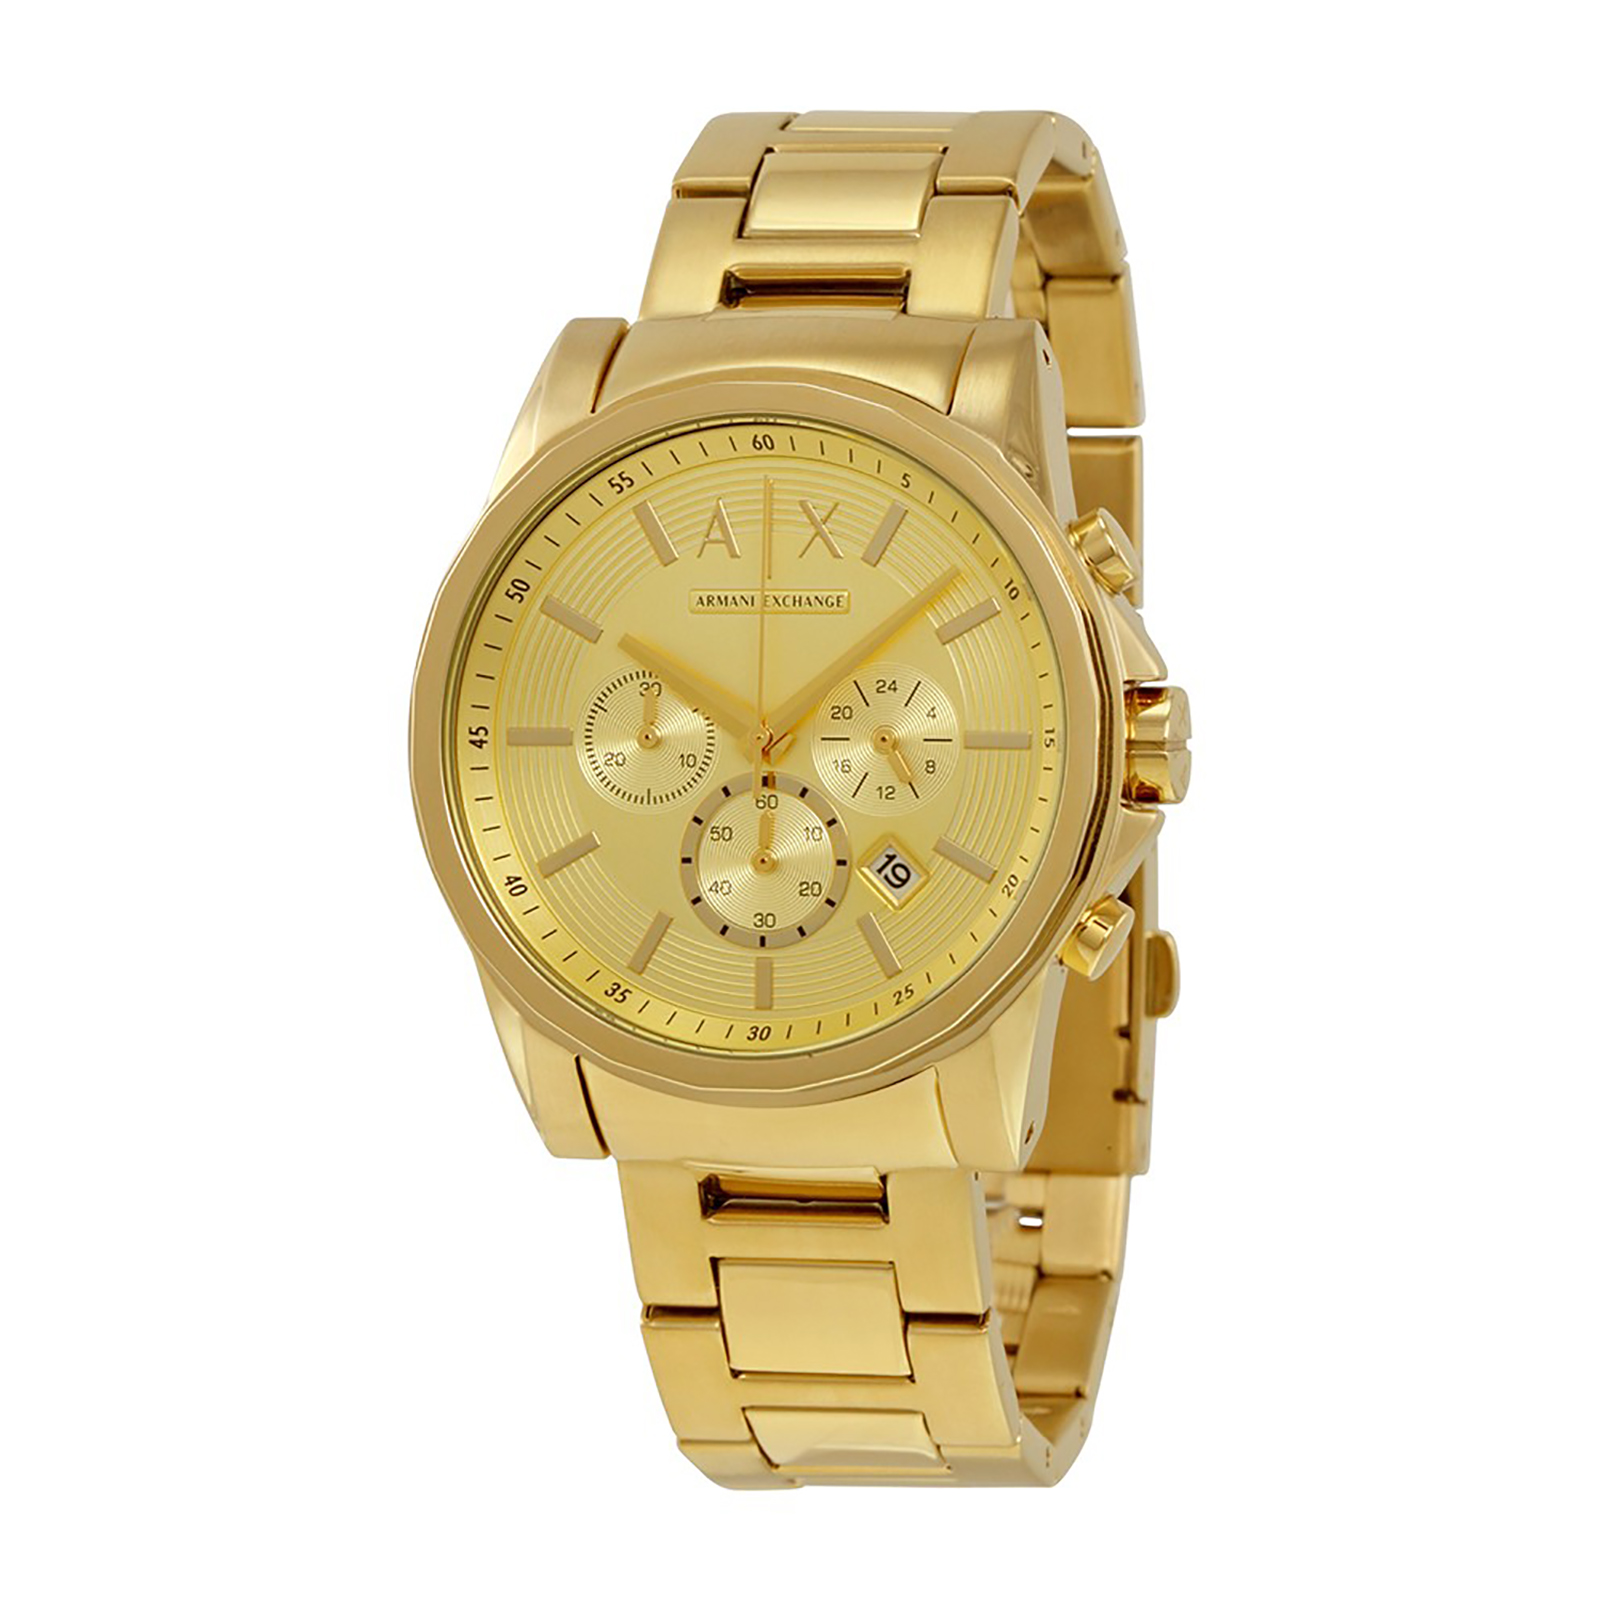 Armani Exchange AX2099 Men's Outerbanks Stainless-Steel Bracelet Watch - Gold